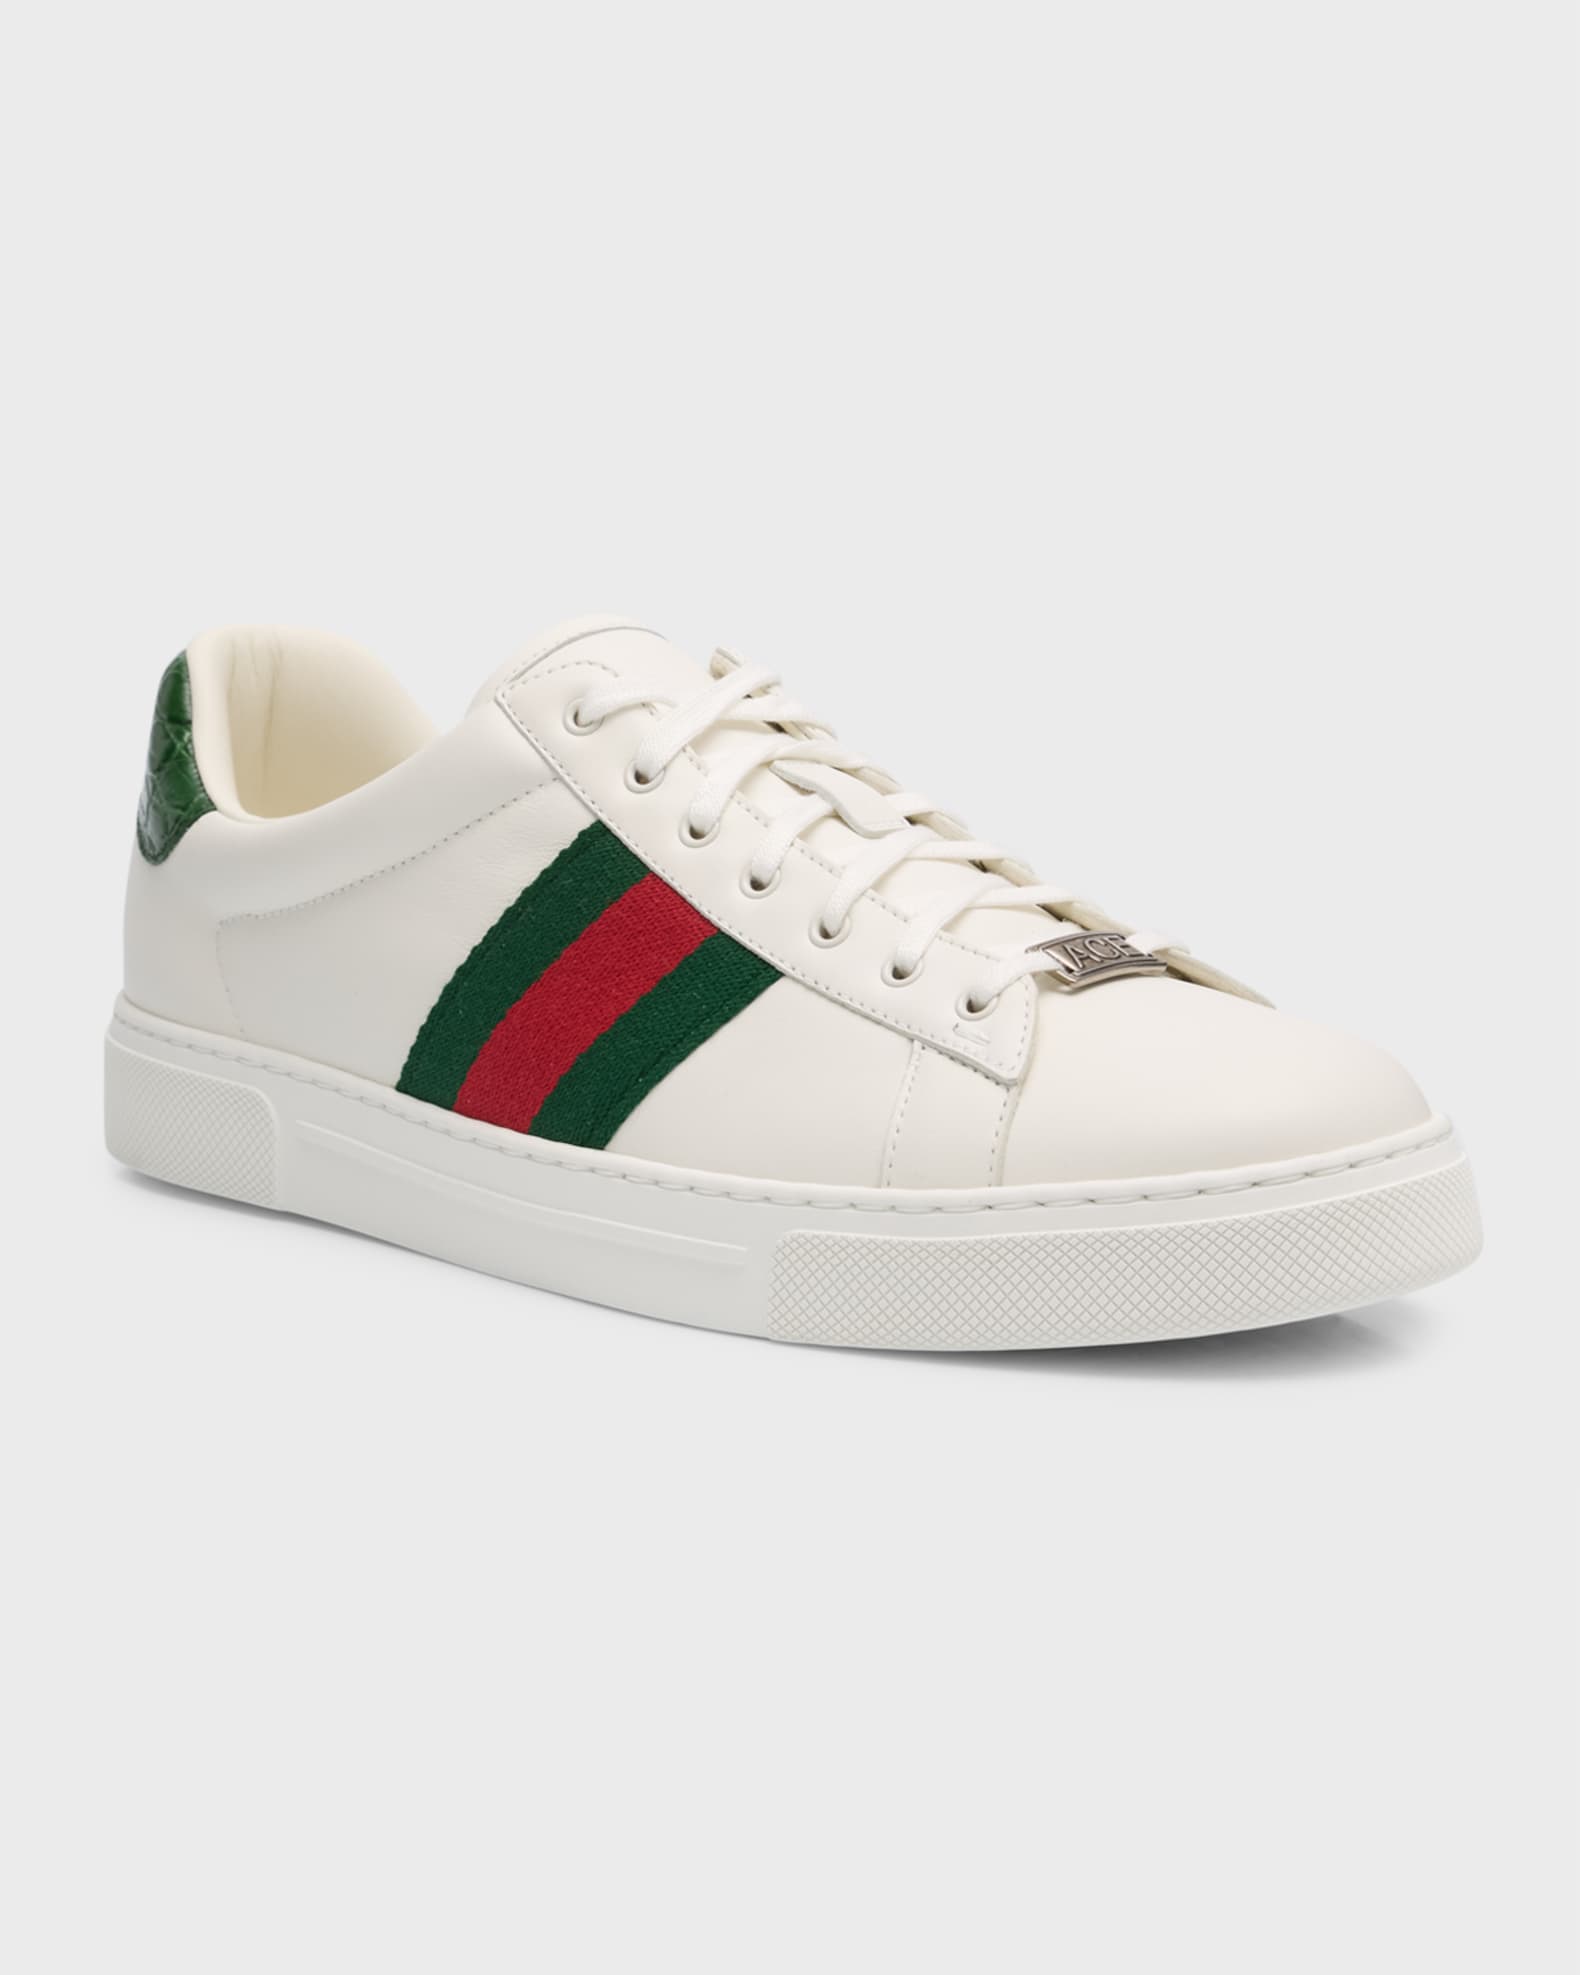 Gucci Men's Ace Leather Web Low-Top Sneakers | Neiman Marcus